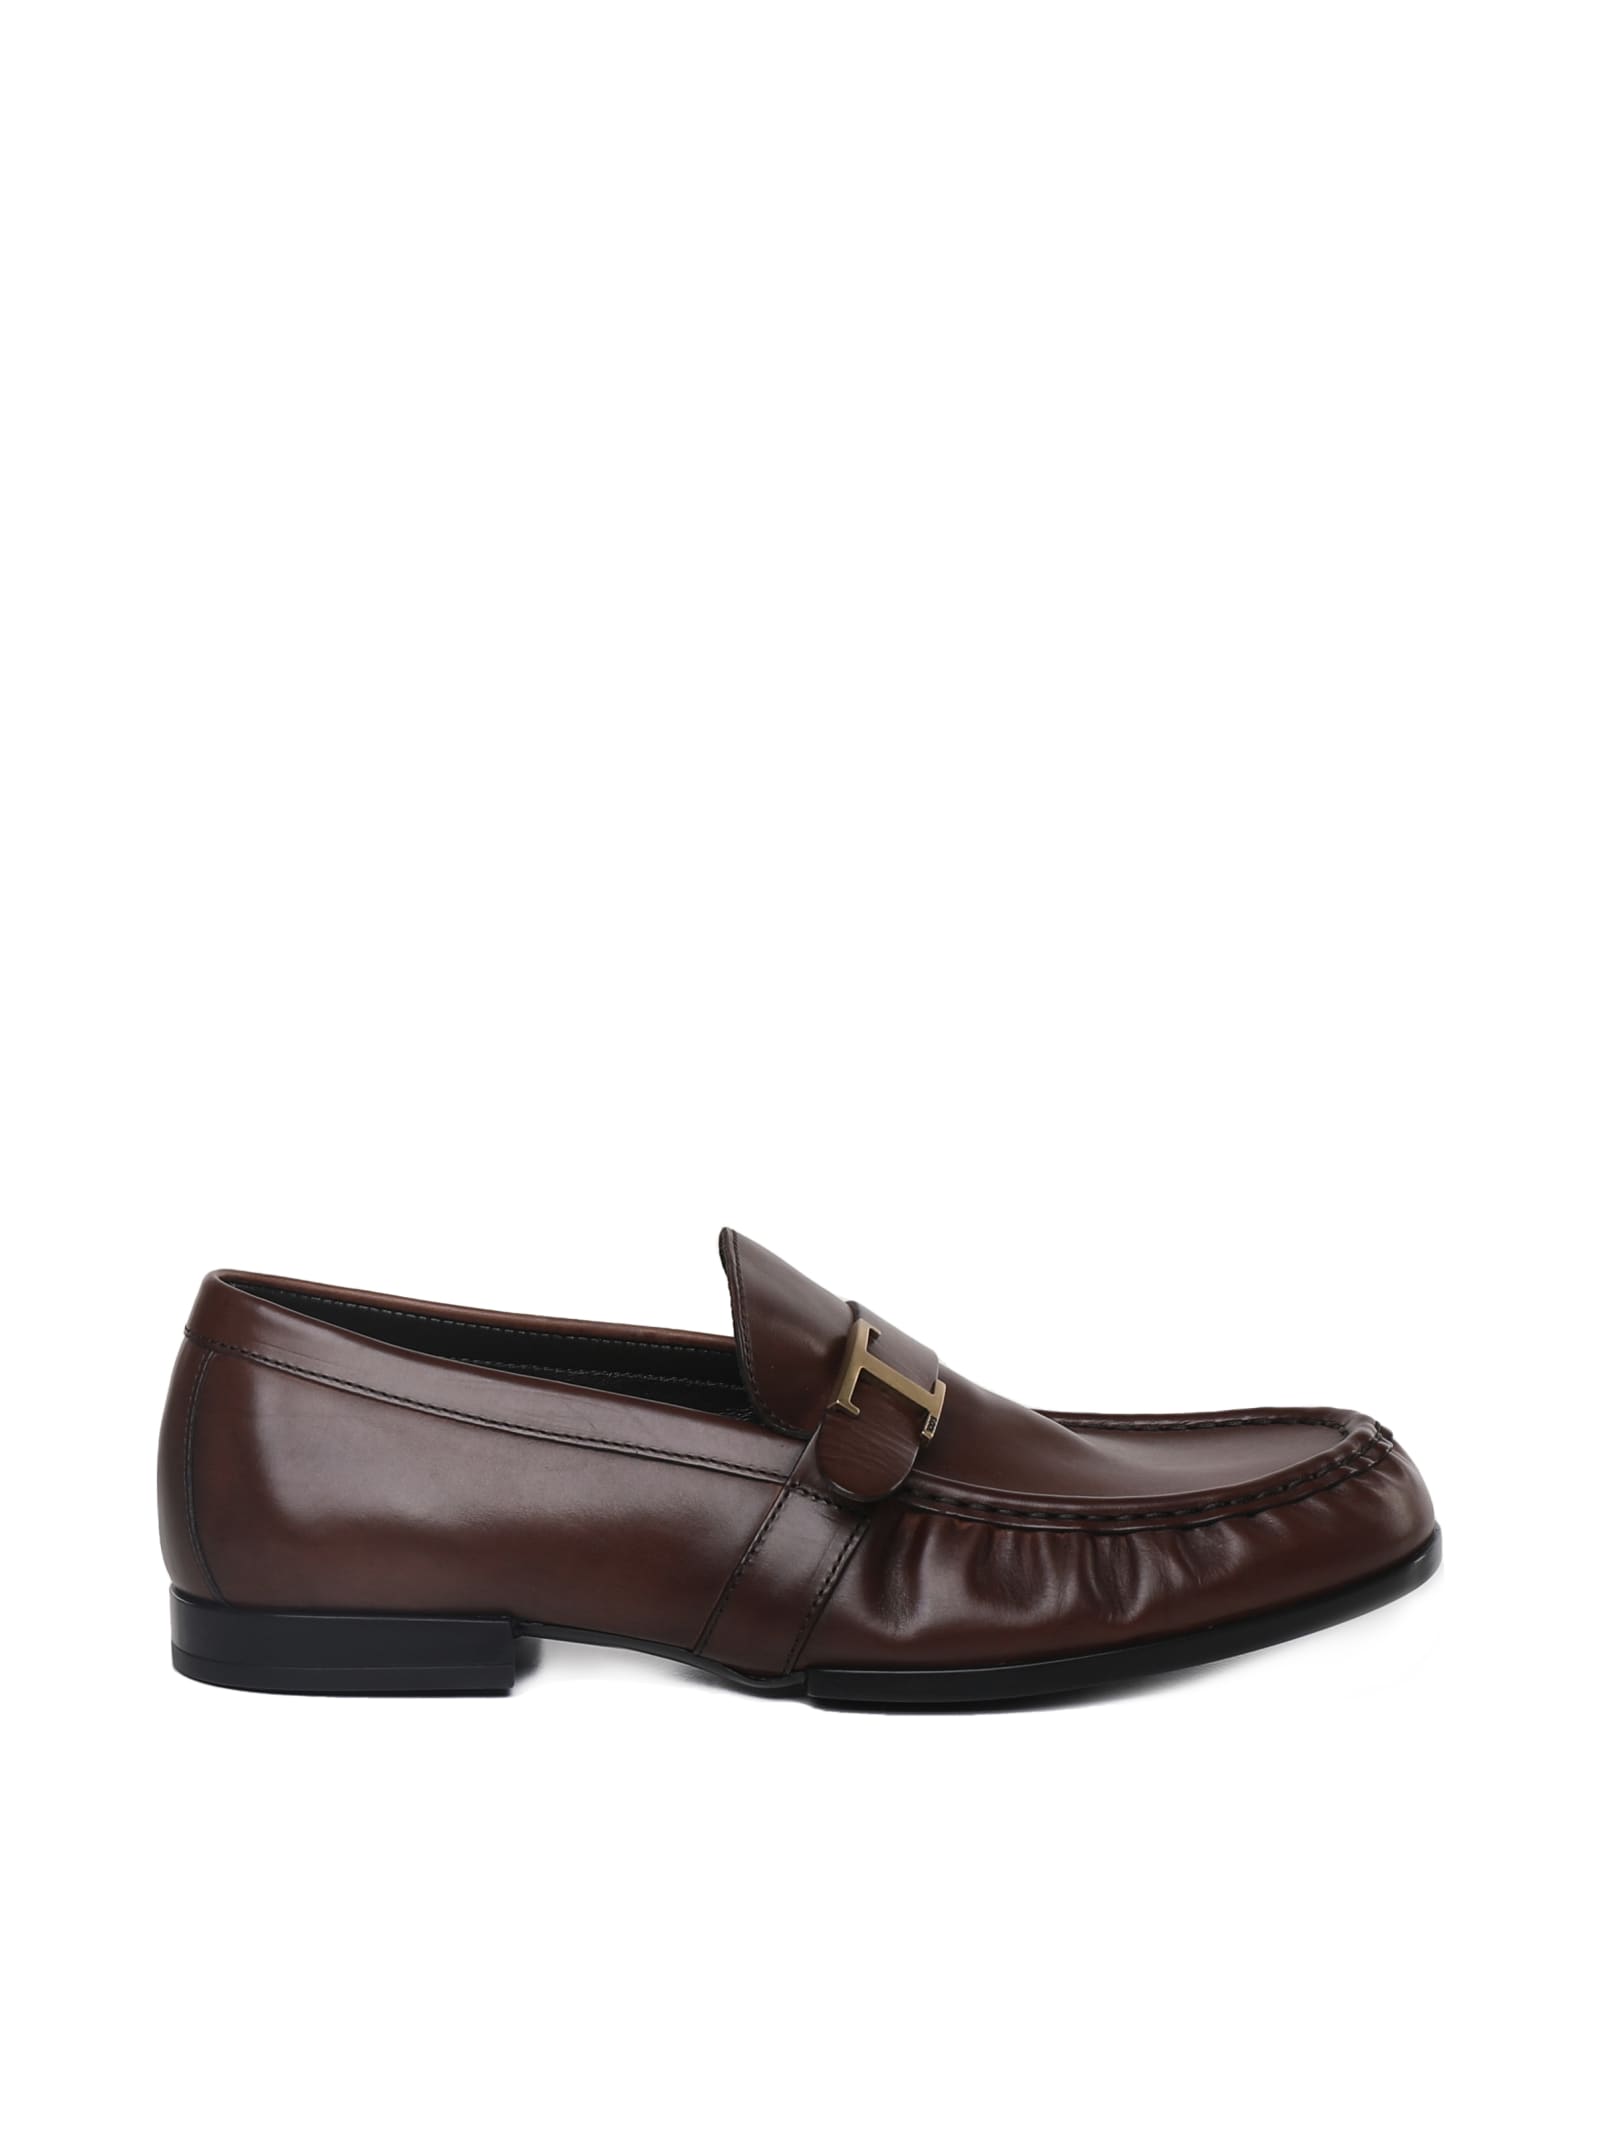 TOD'S TIMELESS LOAFERS IN CALFSKIN